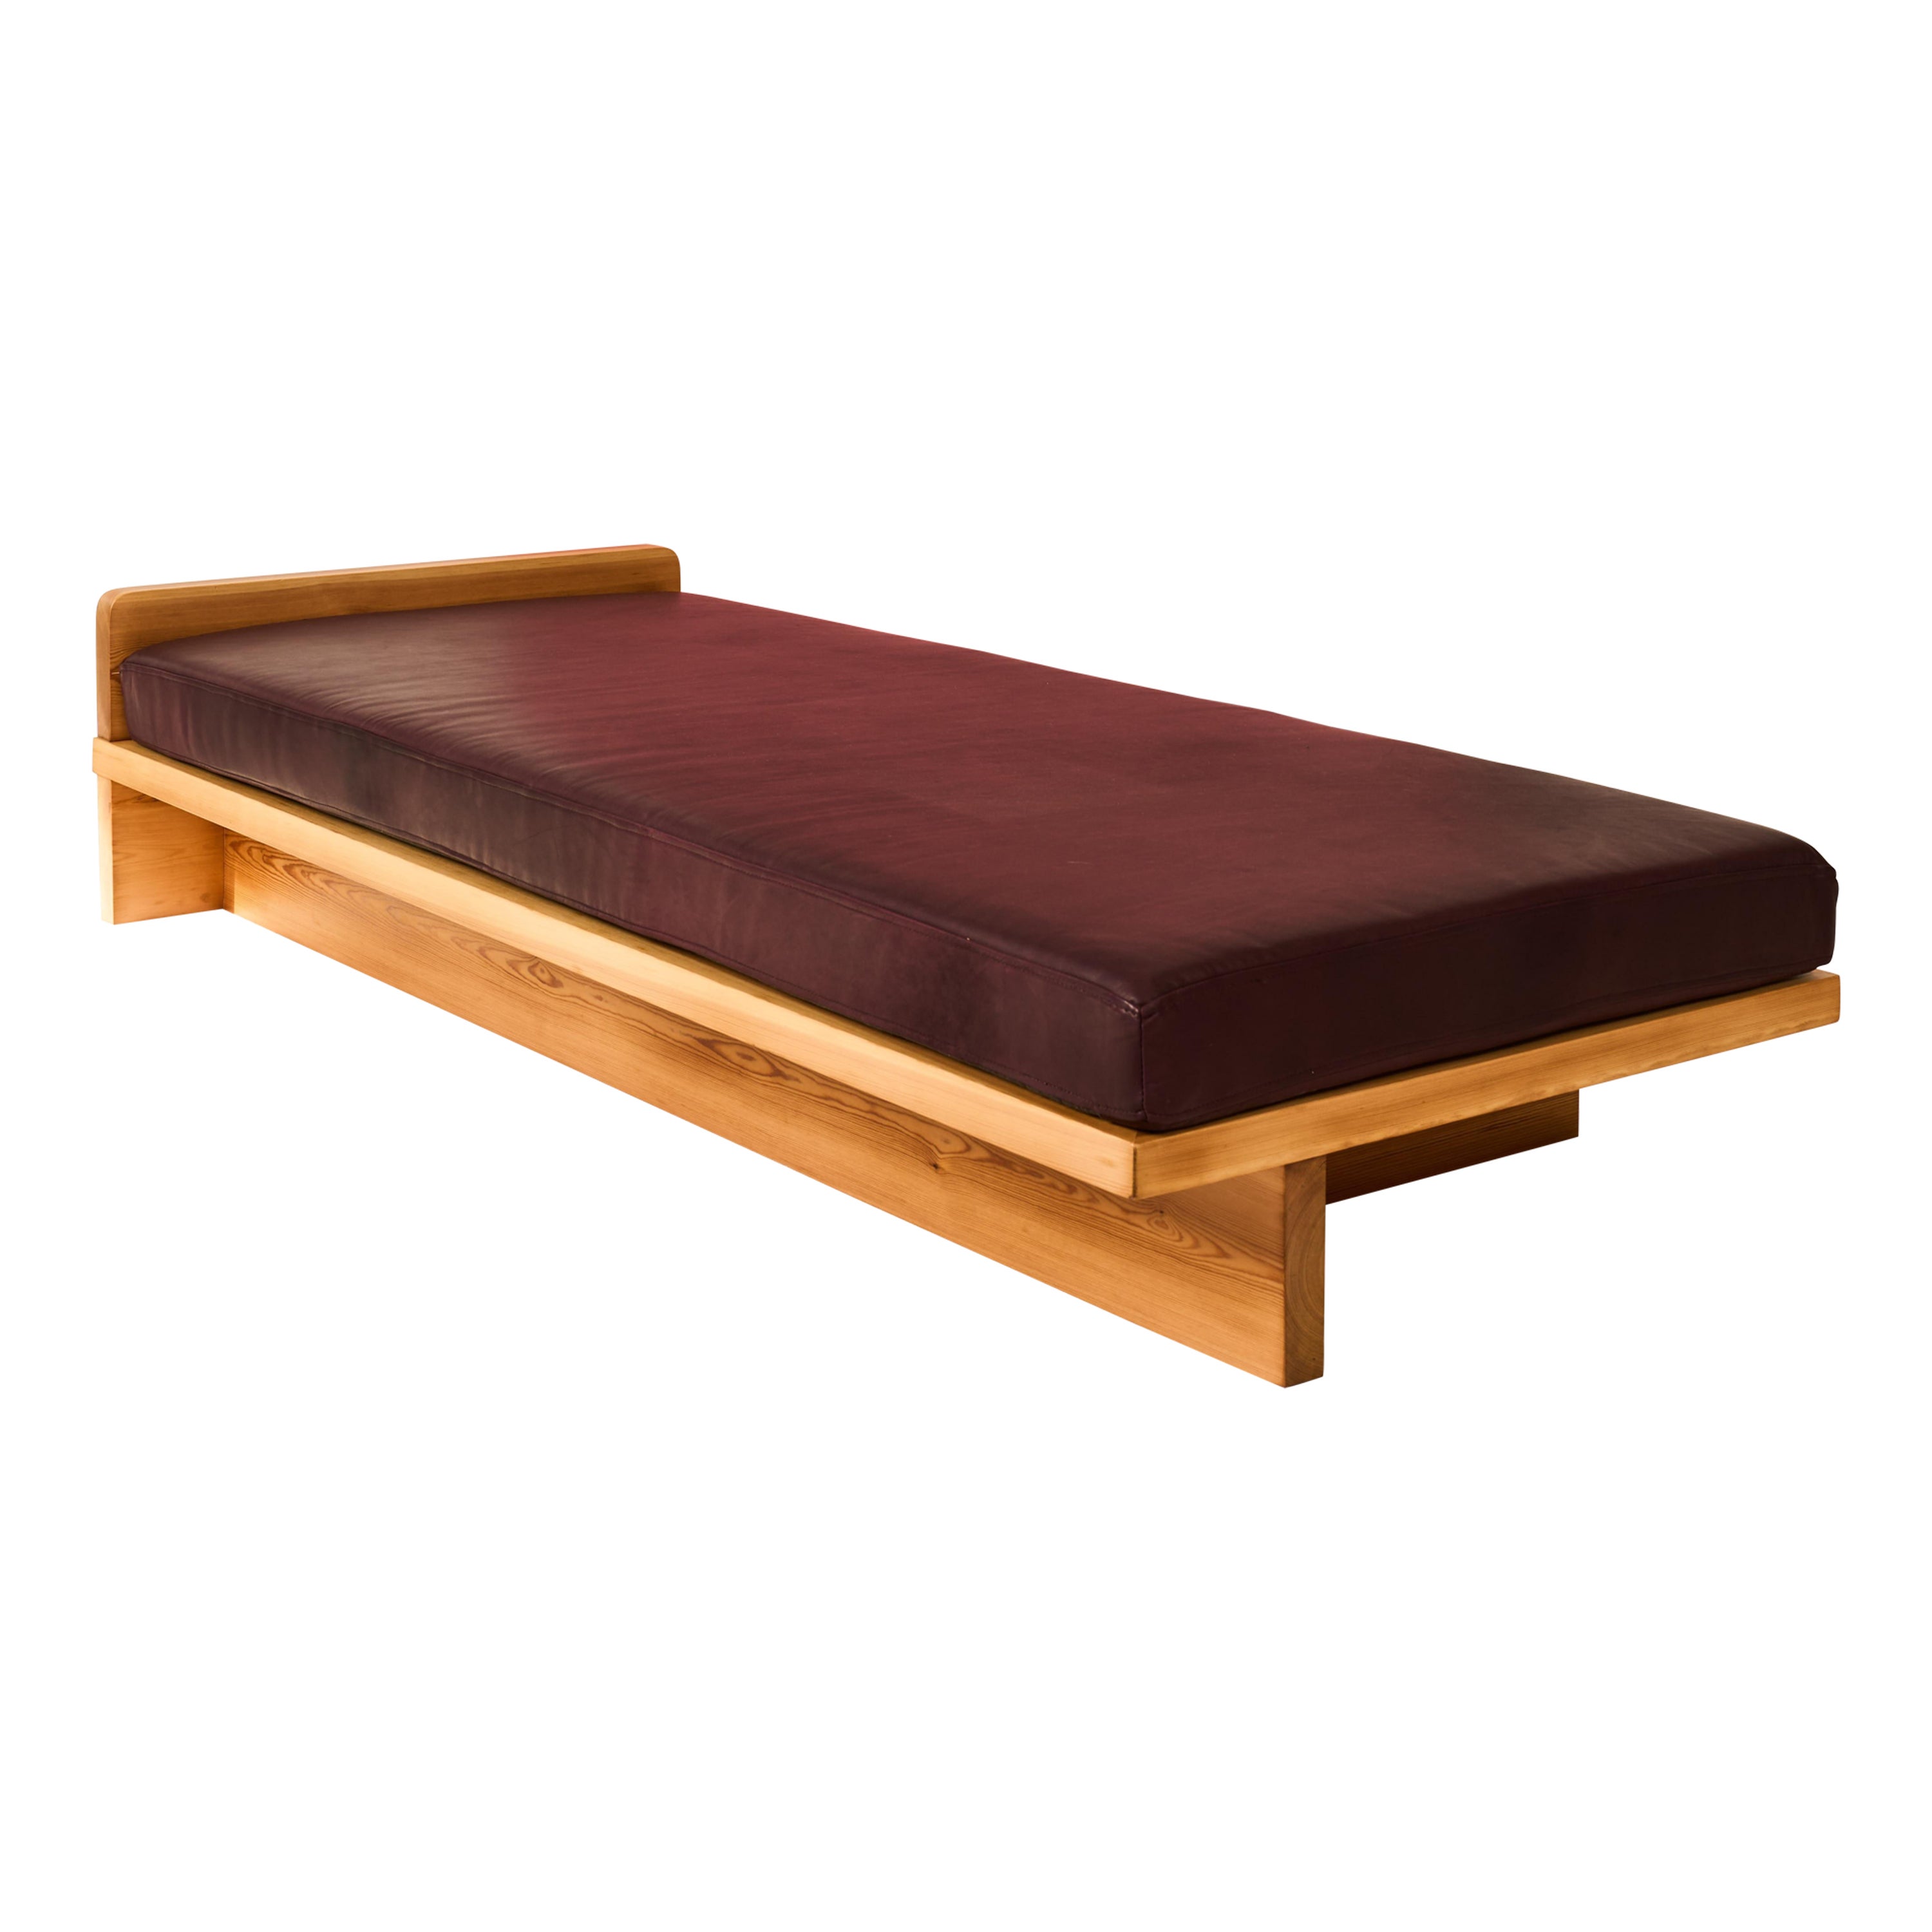 CHRISTOPHE GEVERS - Daybed